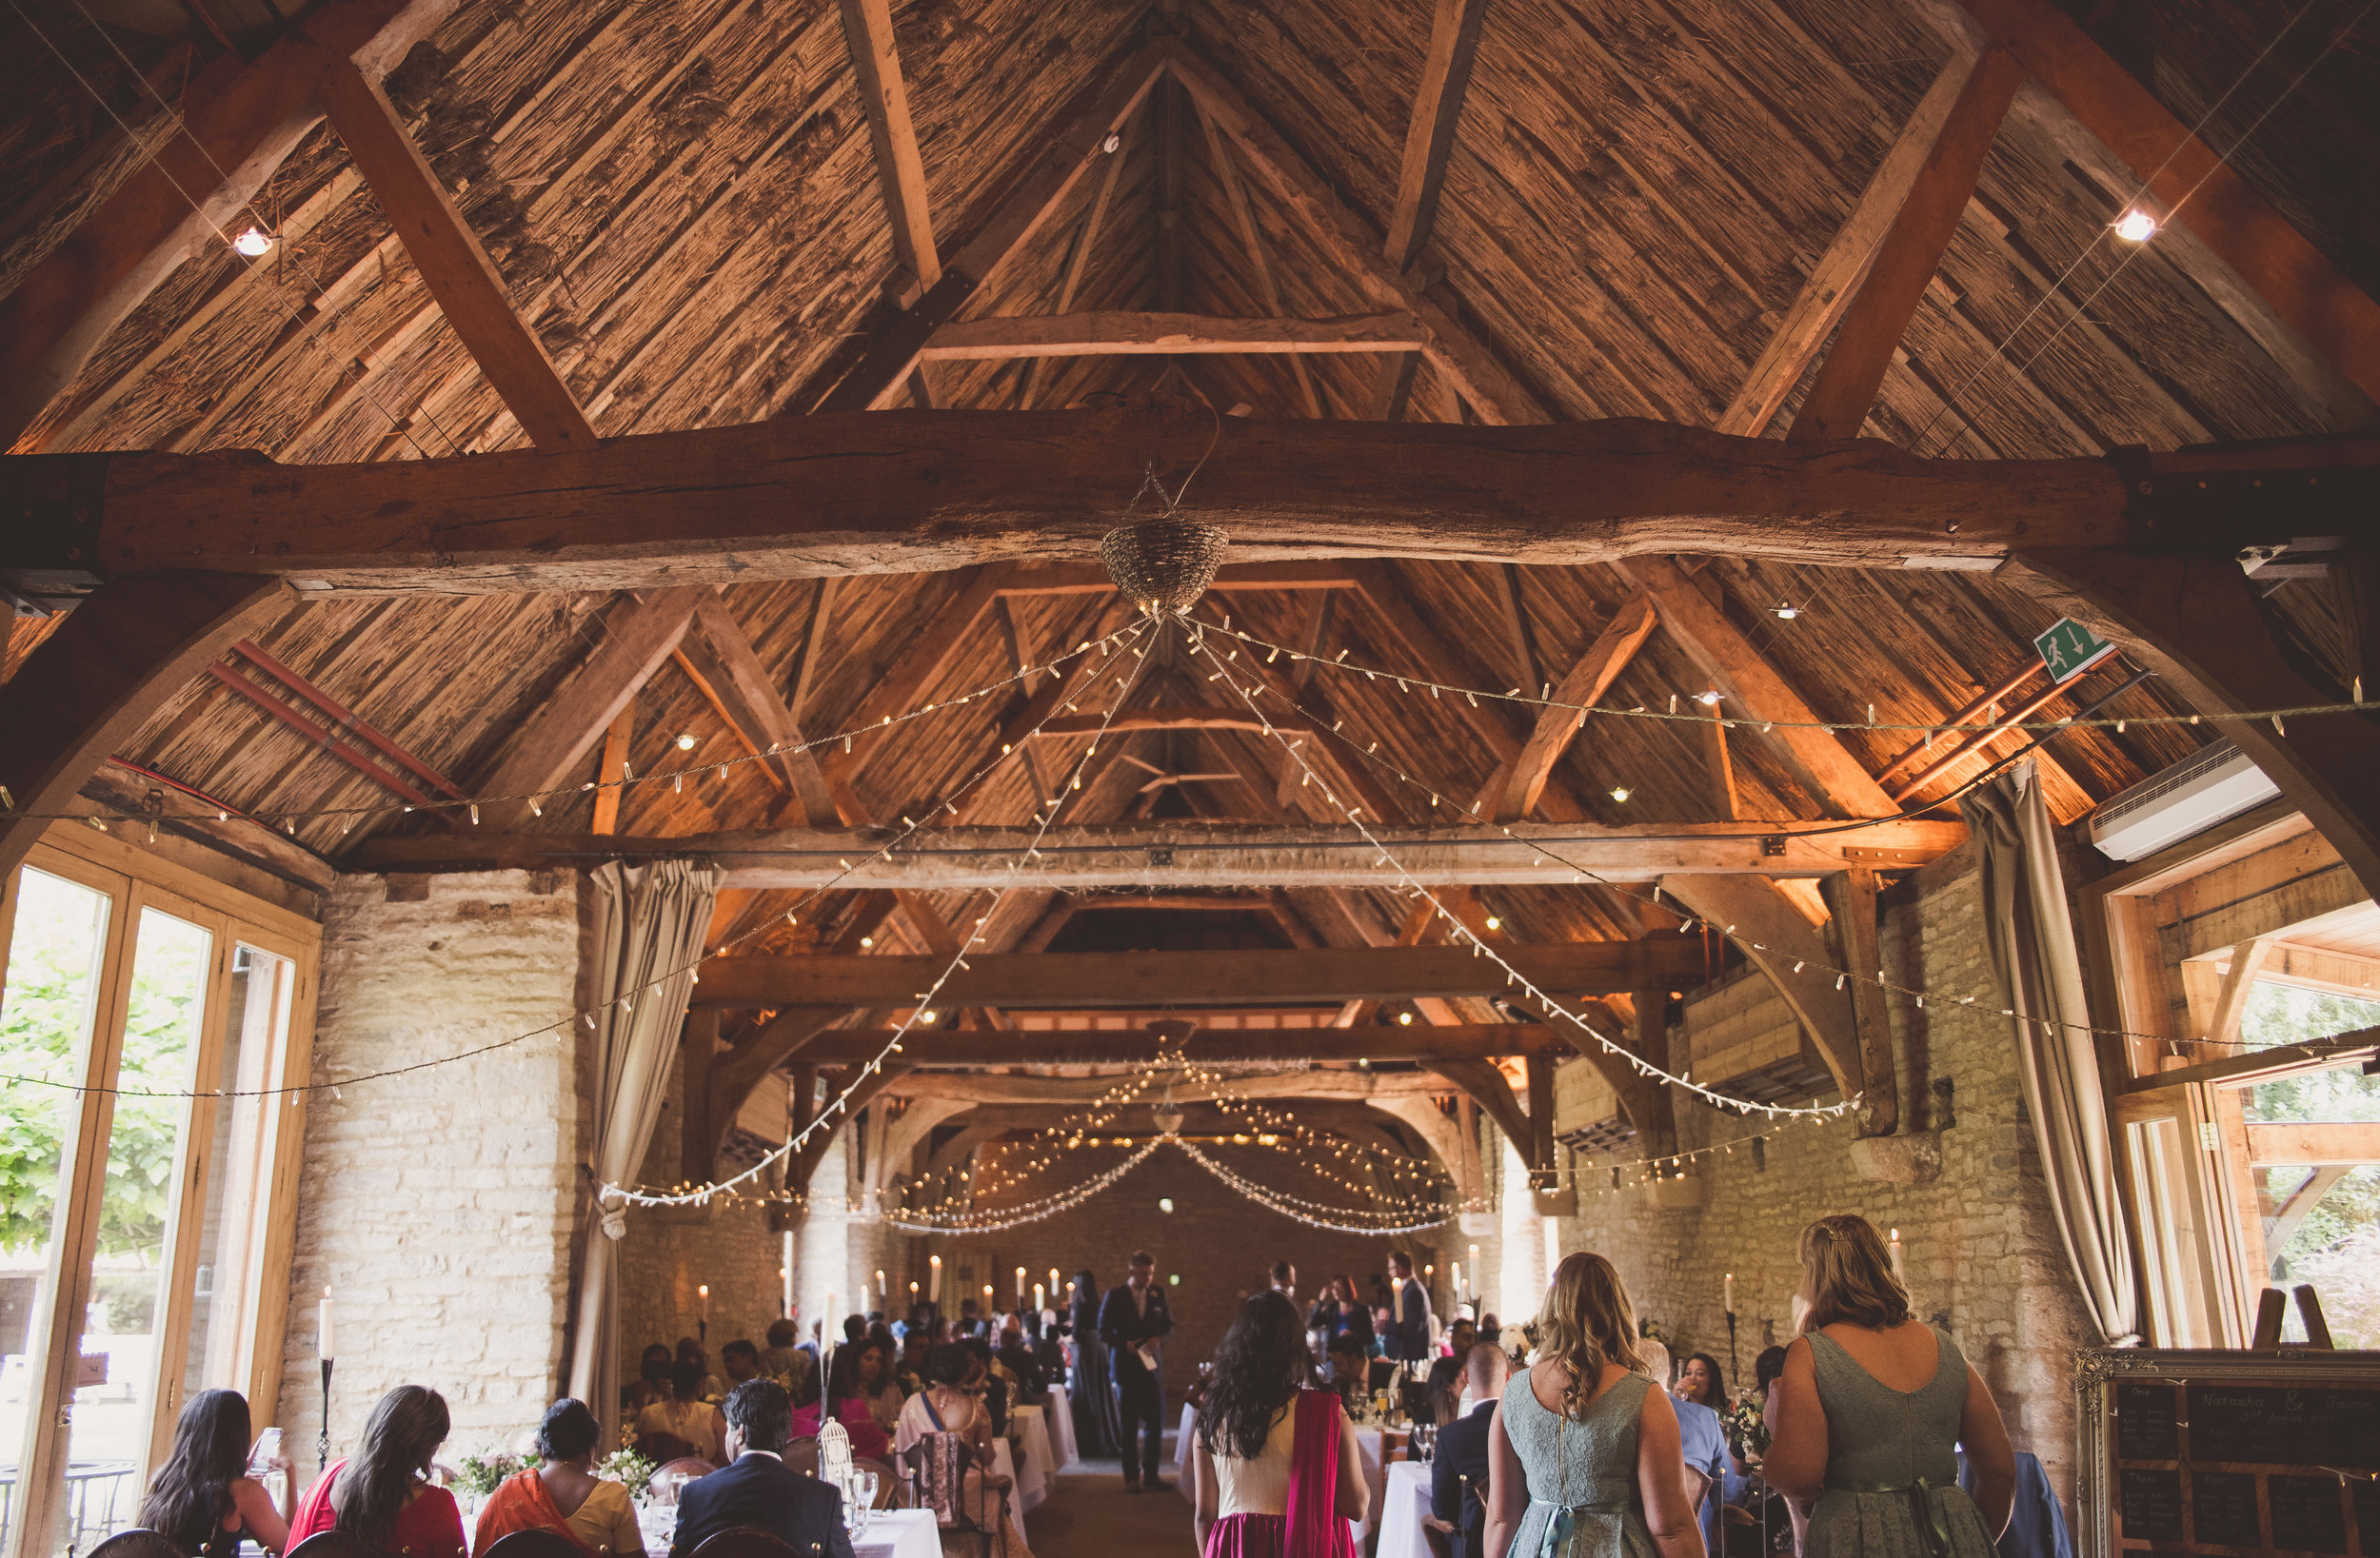 The Tythe Barn set up for a wedding